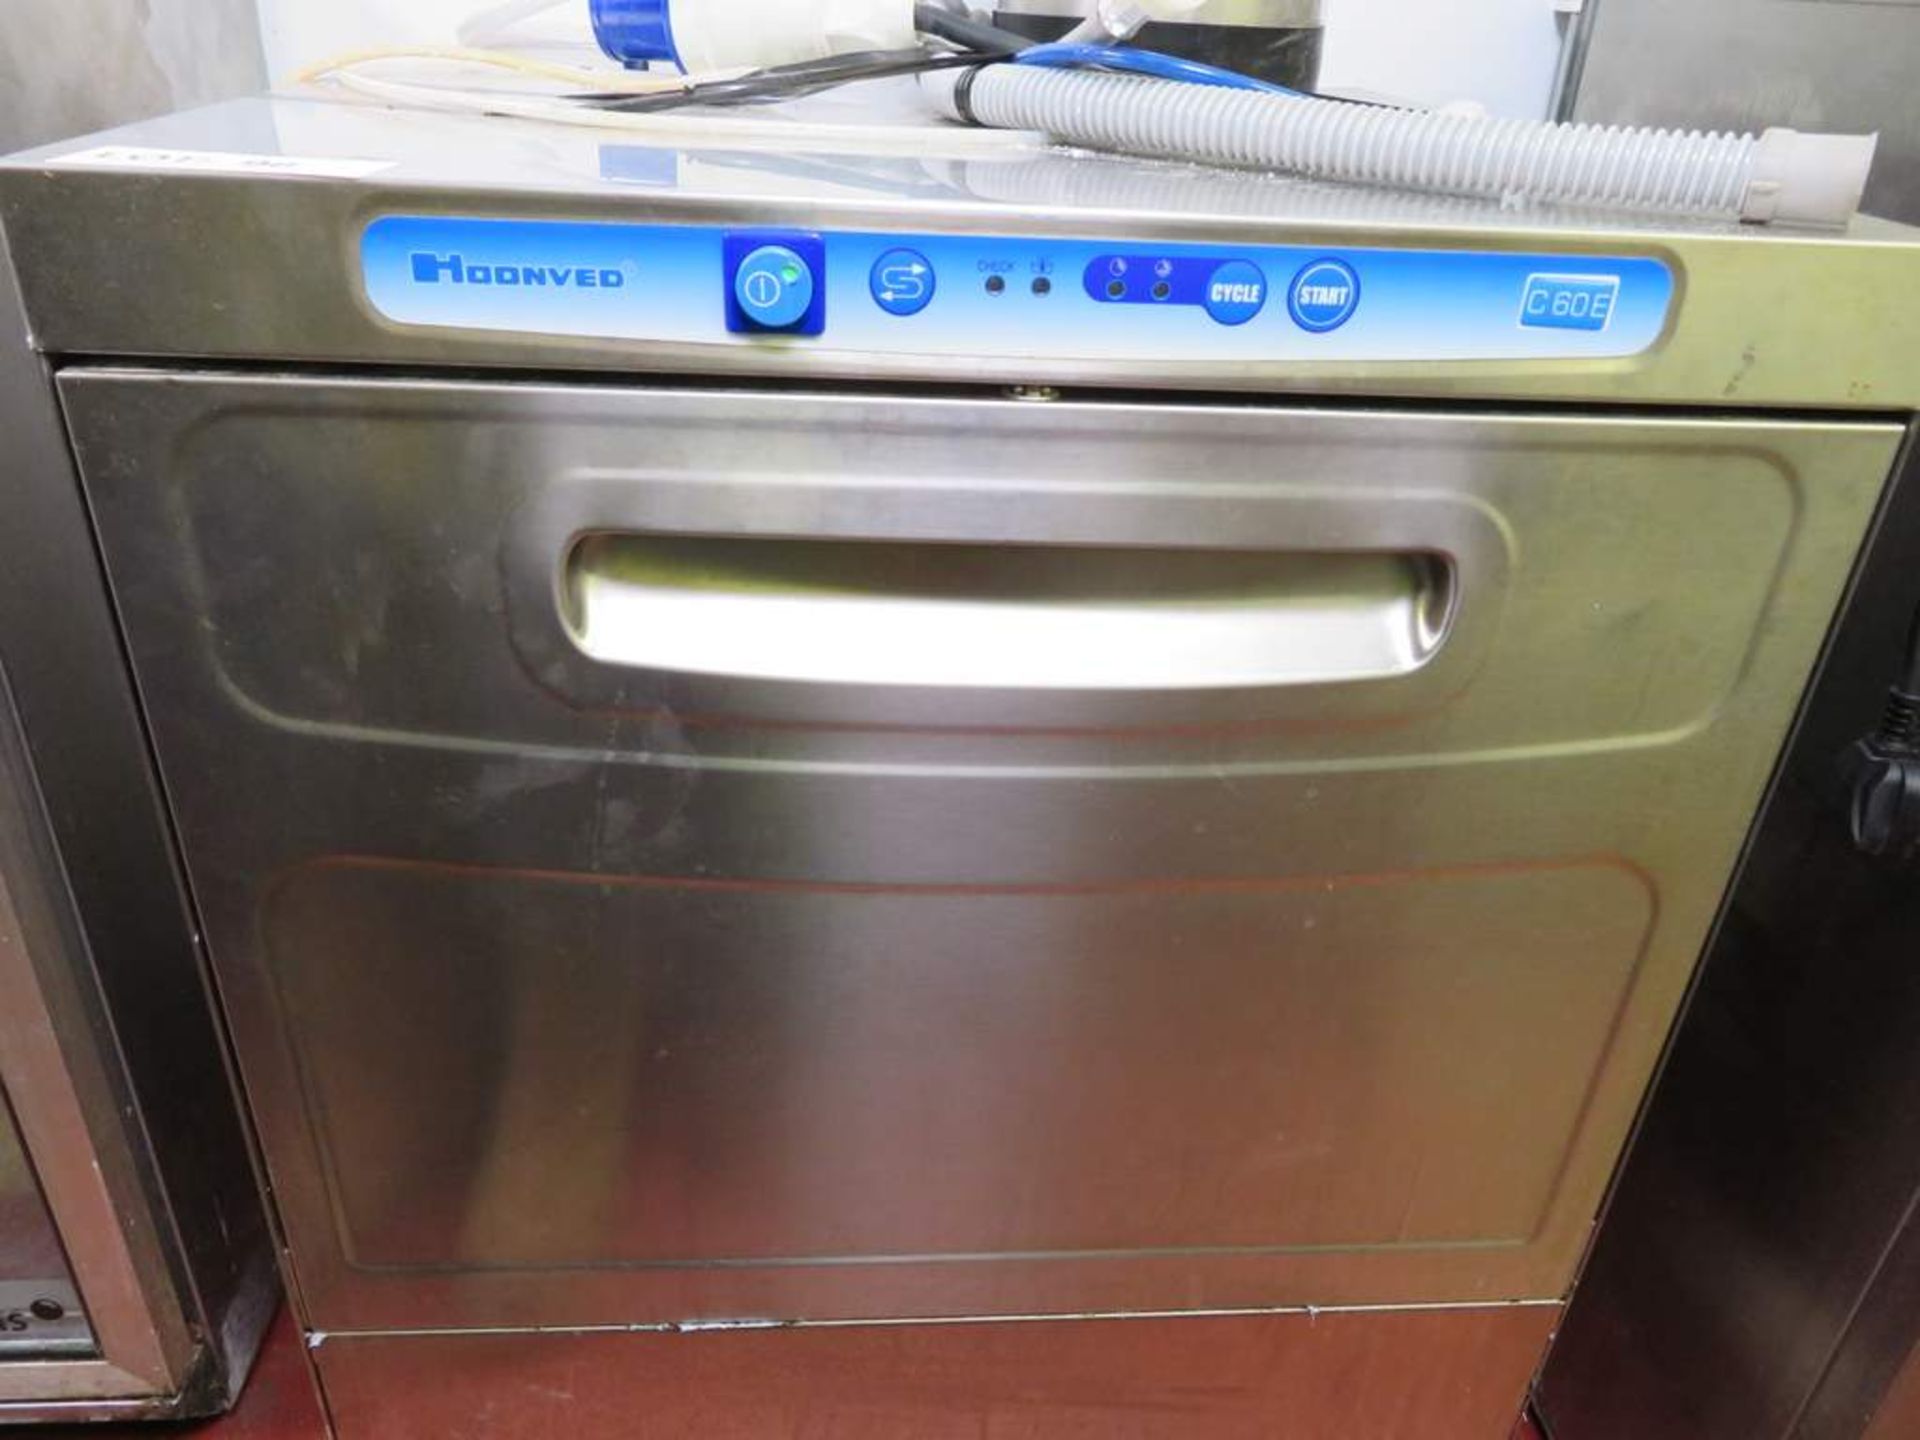 Hoonved stainless steel undercounter dishwasher - Image 2 of 4